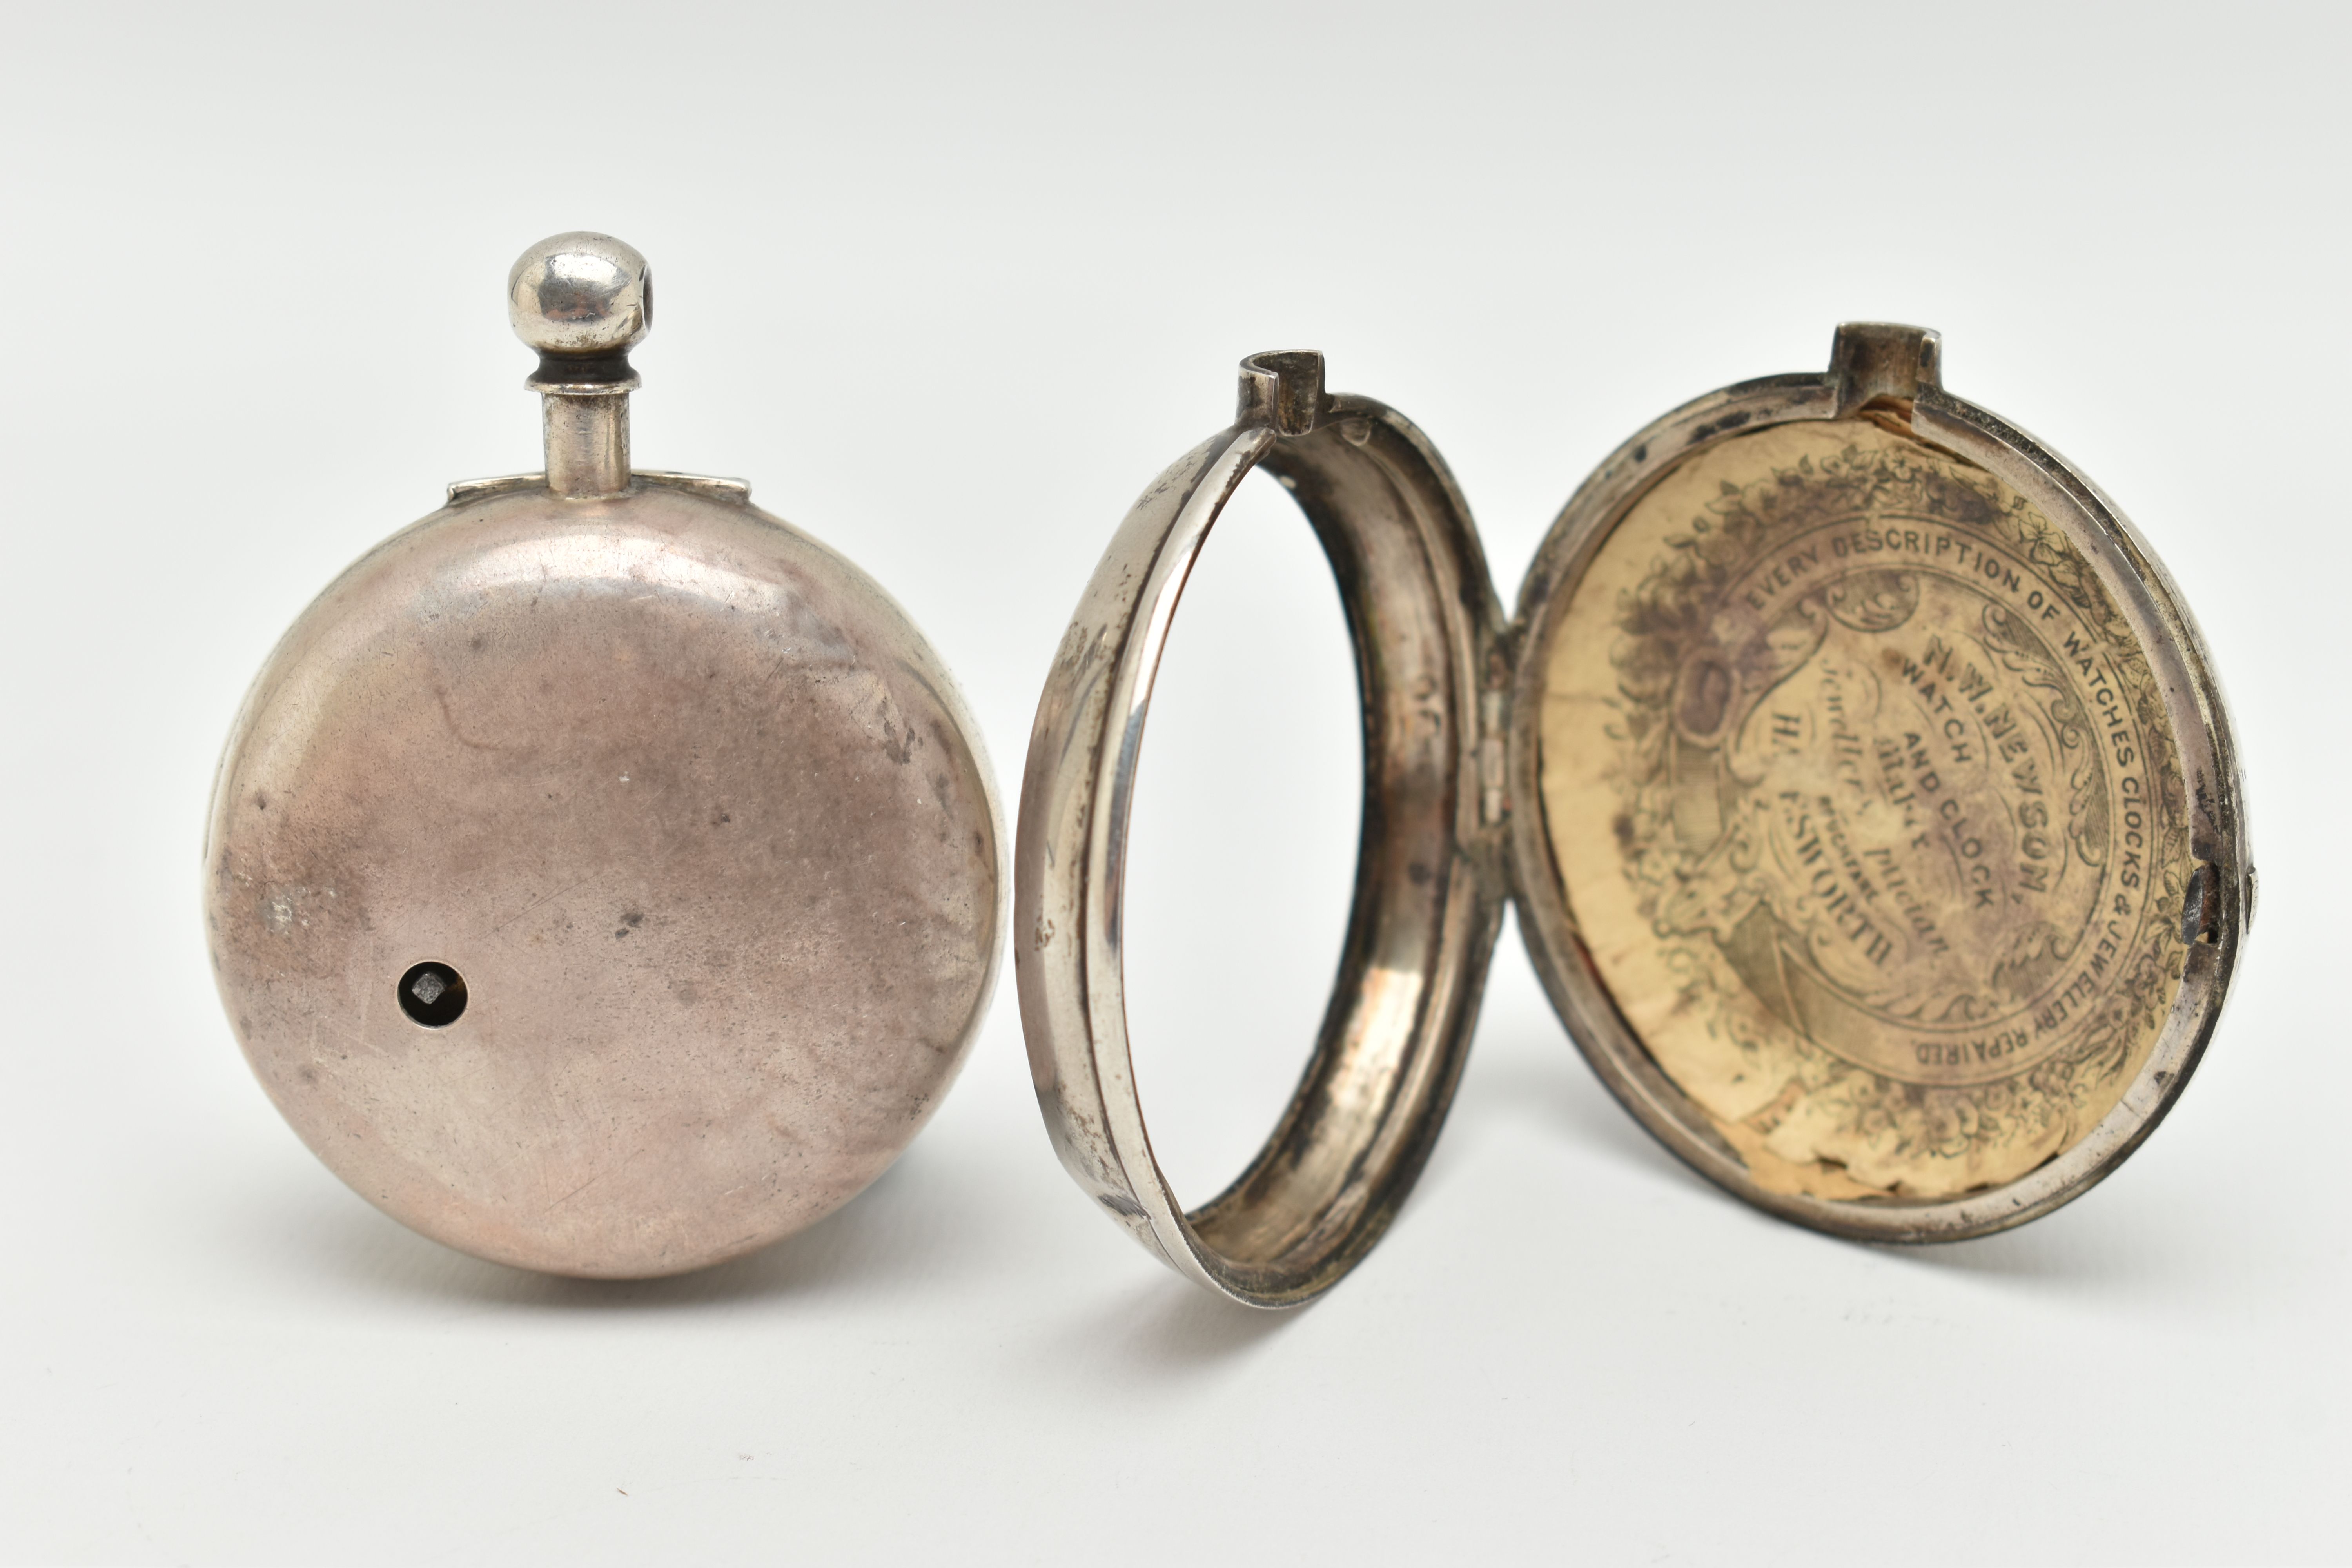 A SILVER PAIR CASE POCKET WATCH, key wound movement, round dial, Roman numerals, plain silver - Image 4 of 7